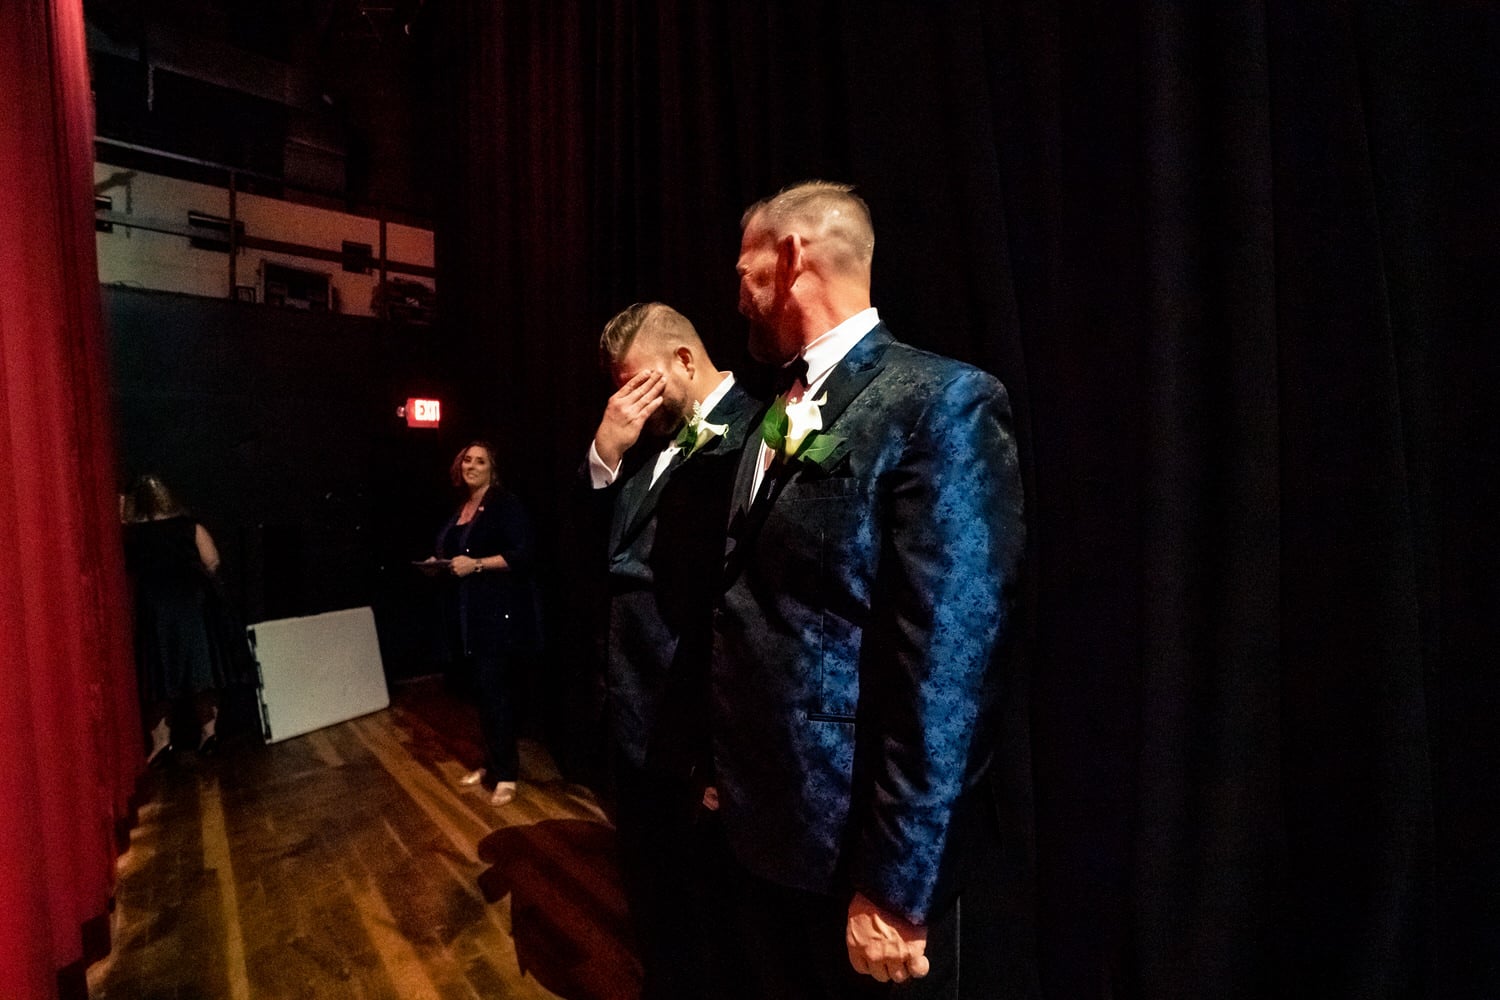 A candid picture of a groom wiping tears from his eye moments before his wedding ceremony starts at The Madrid Theatre in Kansas City. 